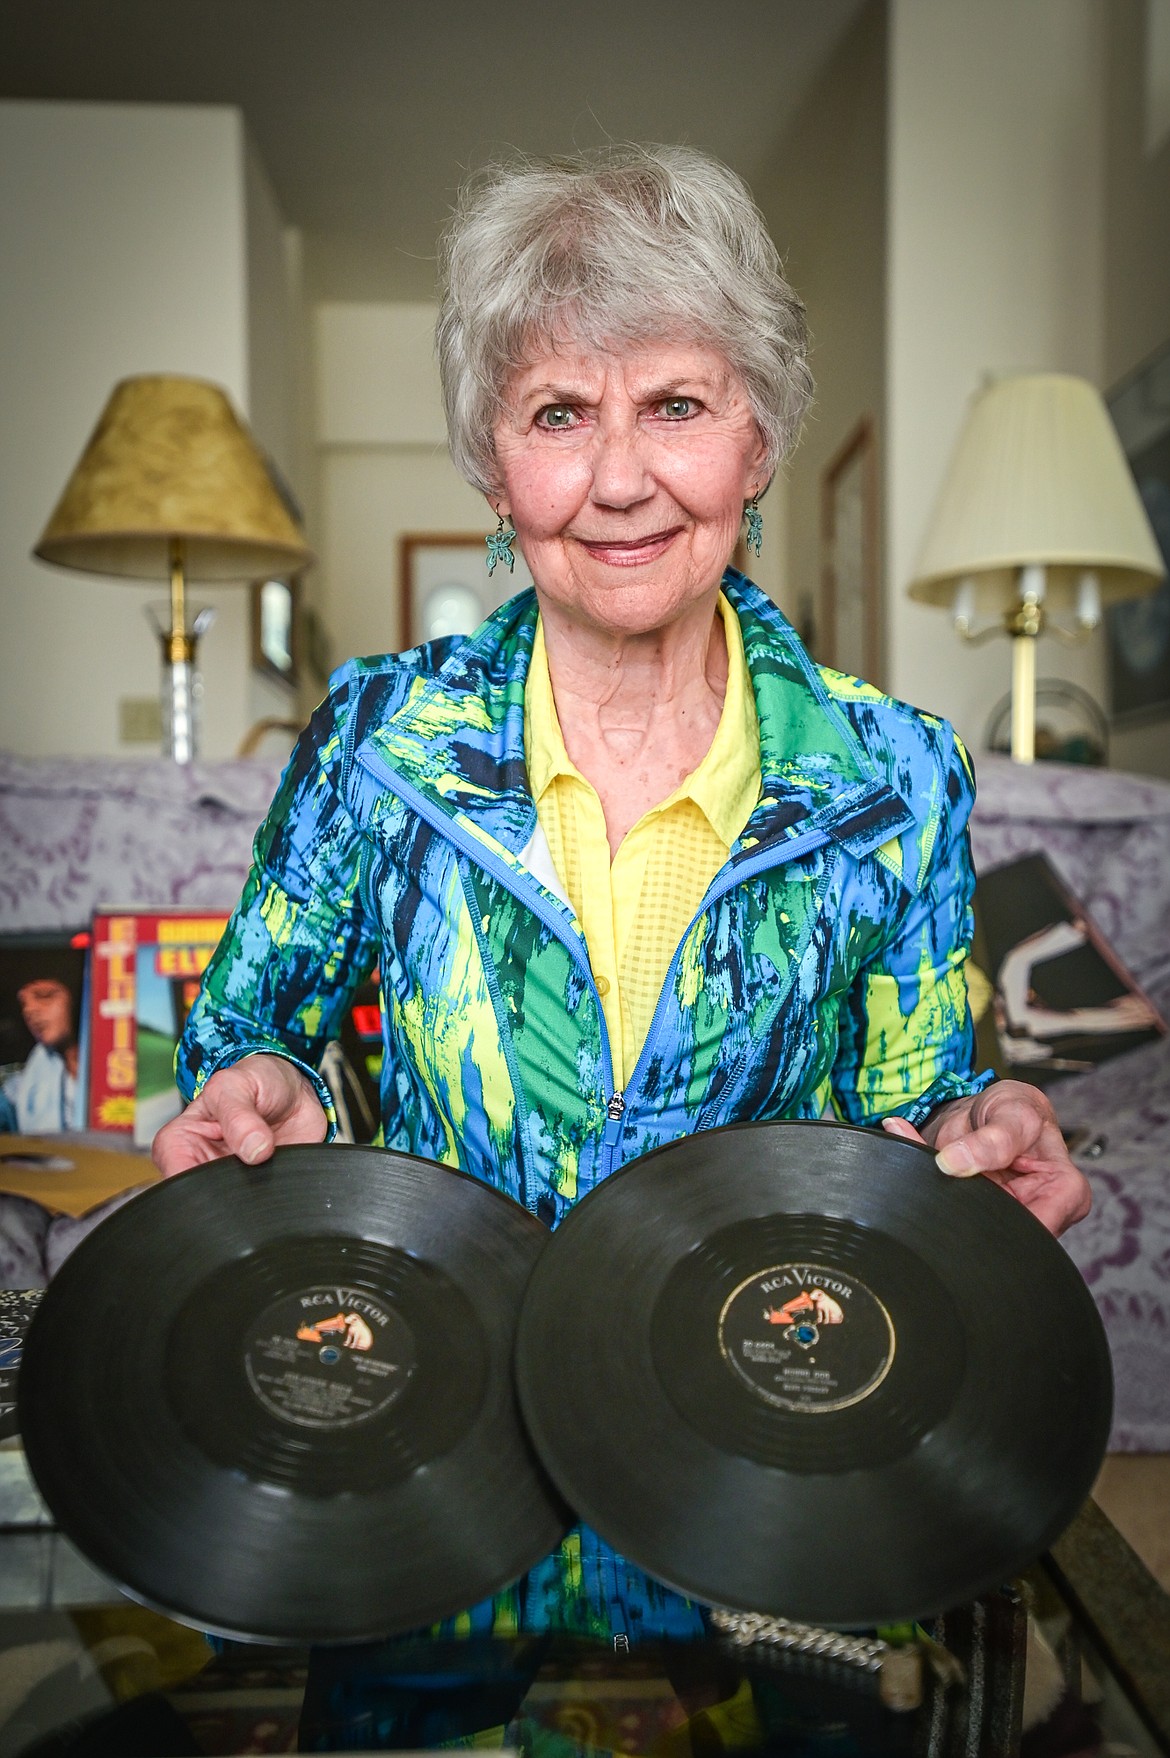 Priscilla Alden French shows two of her Elvis Presley 78 RPM records "Jailhouse Rock" and "Hound Dog" at her residence on Tuesday, June 28. (Casey Kreider/Daily Inter Lake)